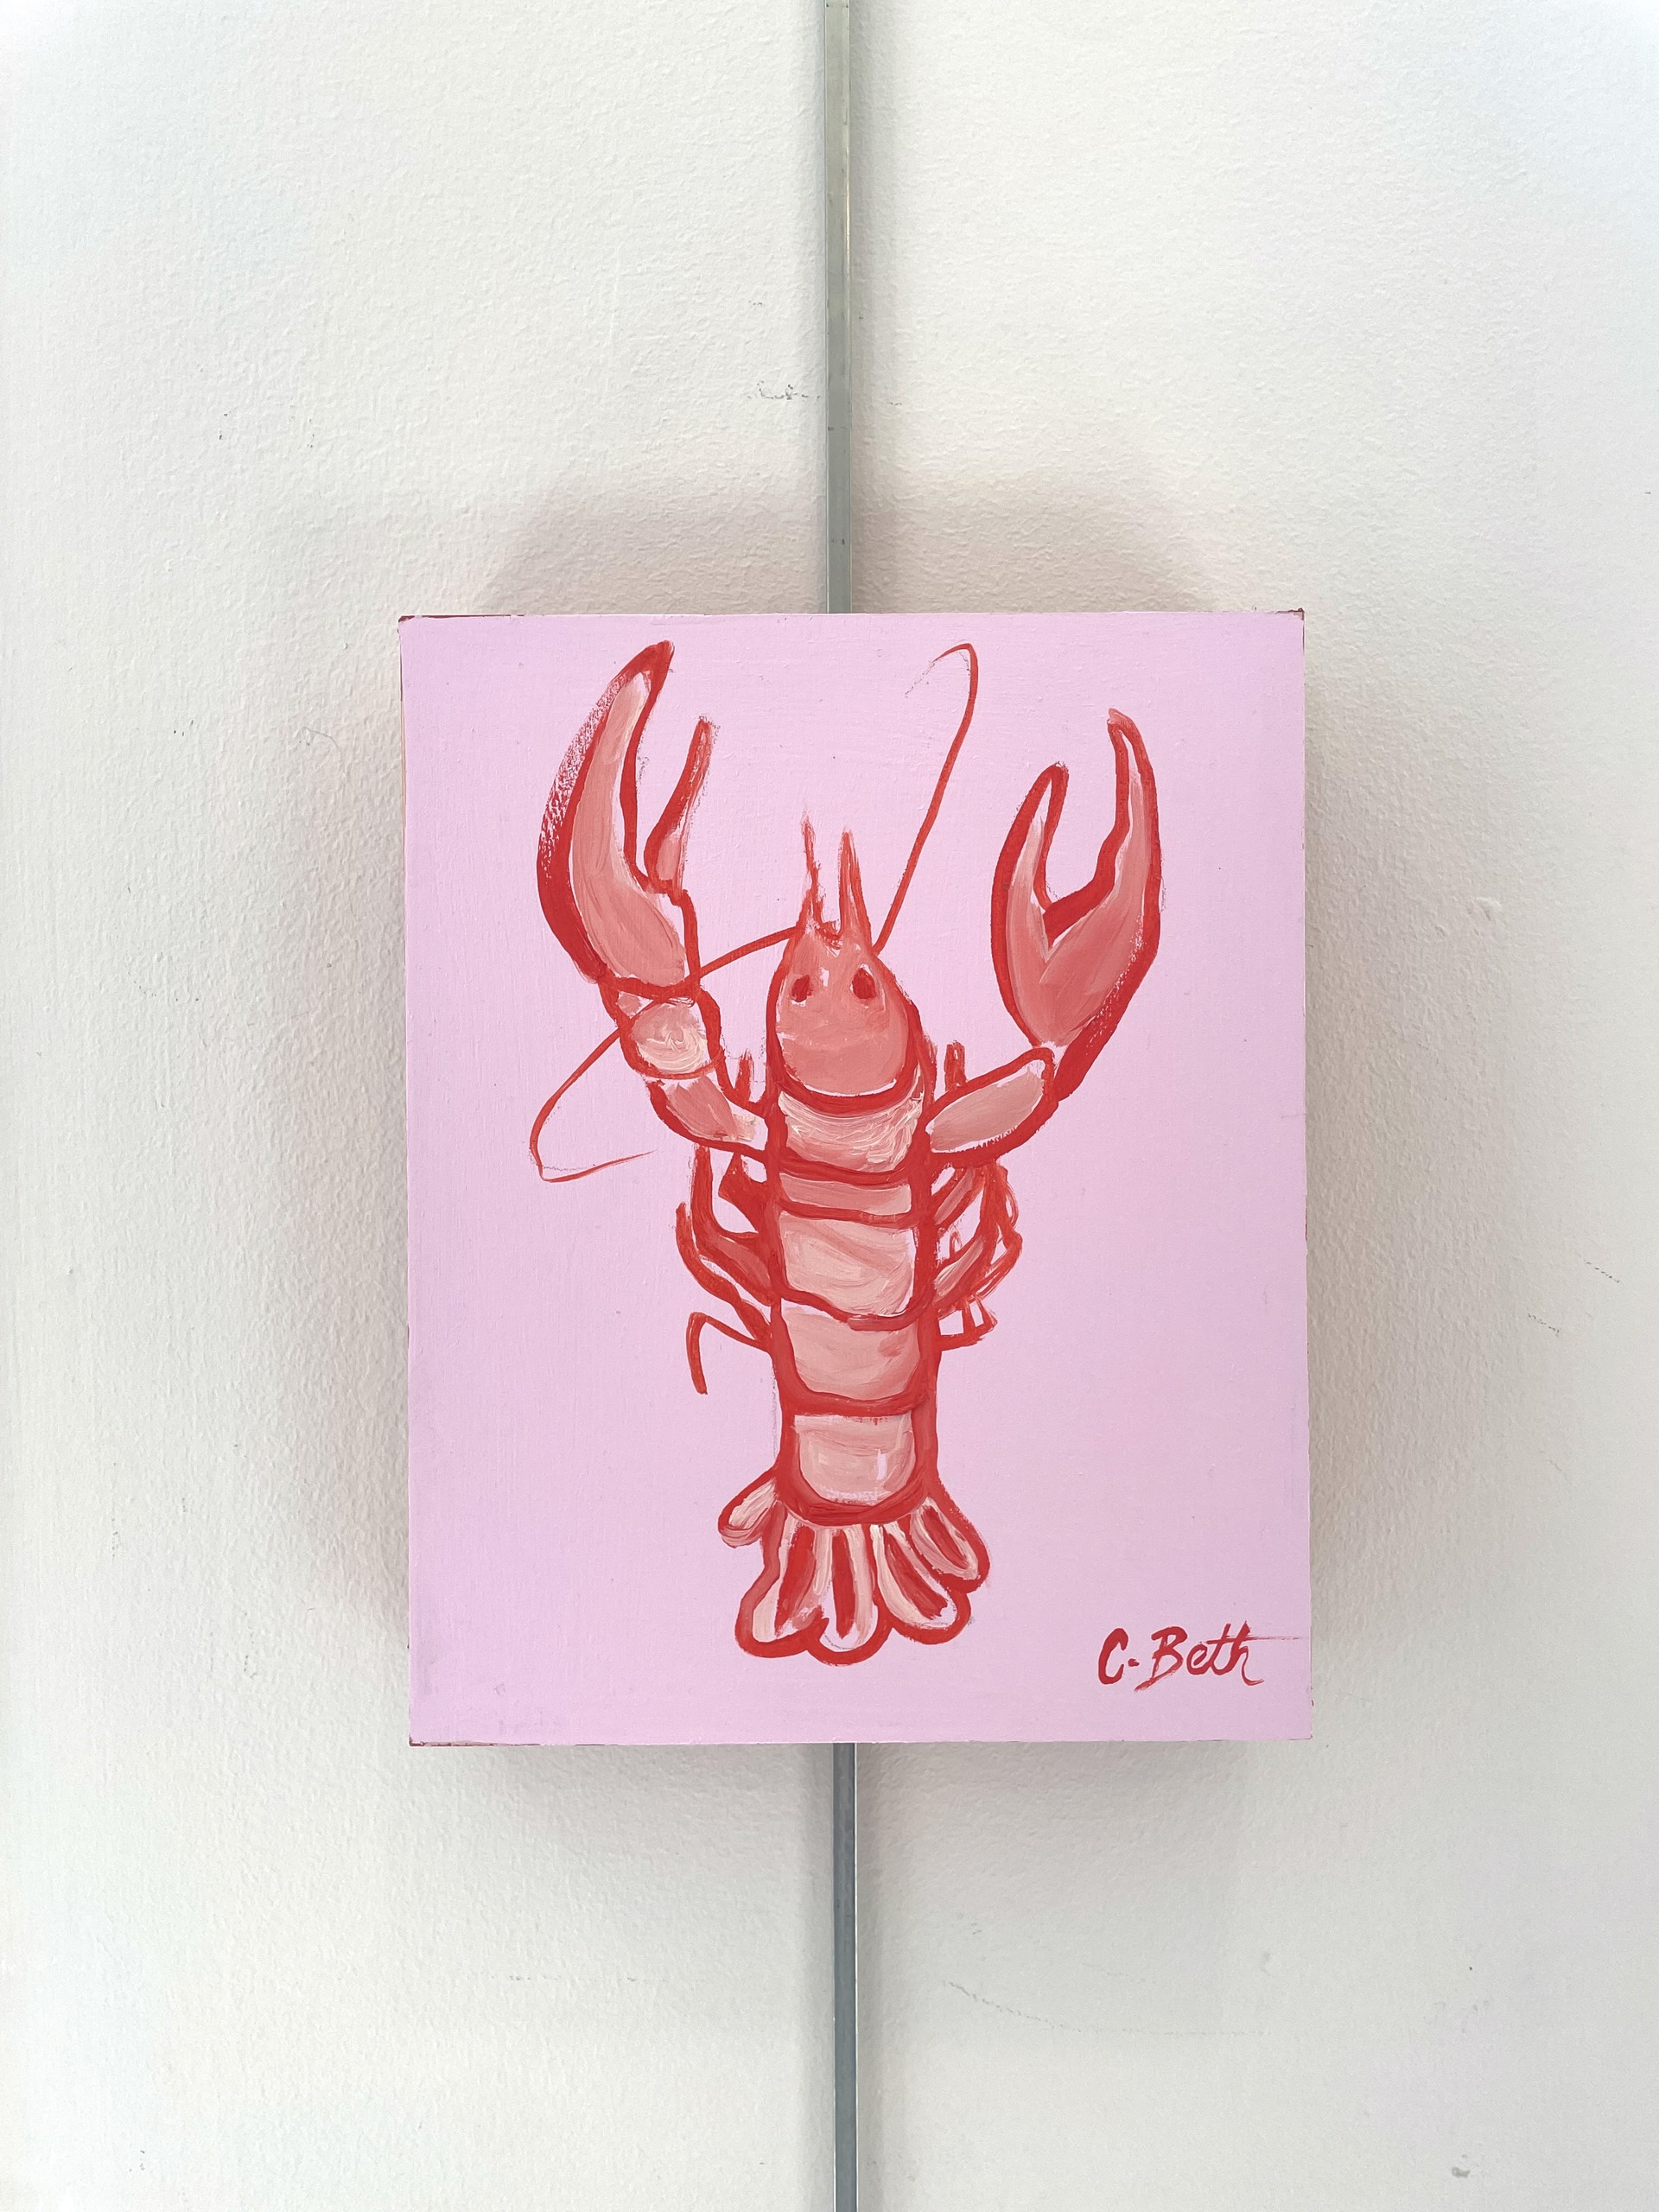 Rock Lobster by Carrie Beth Waghorn